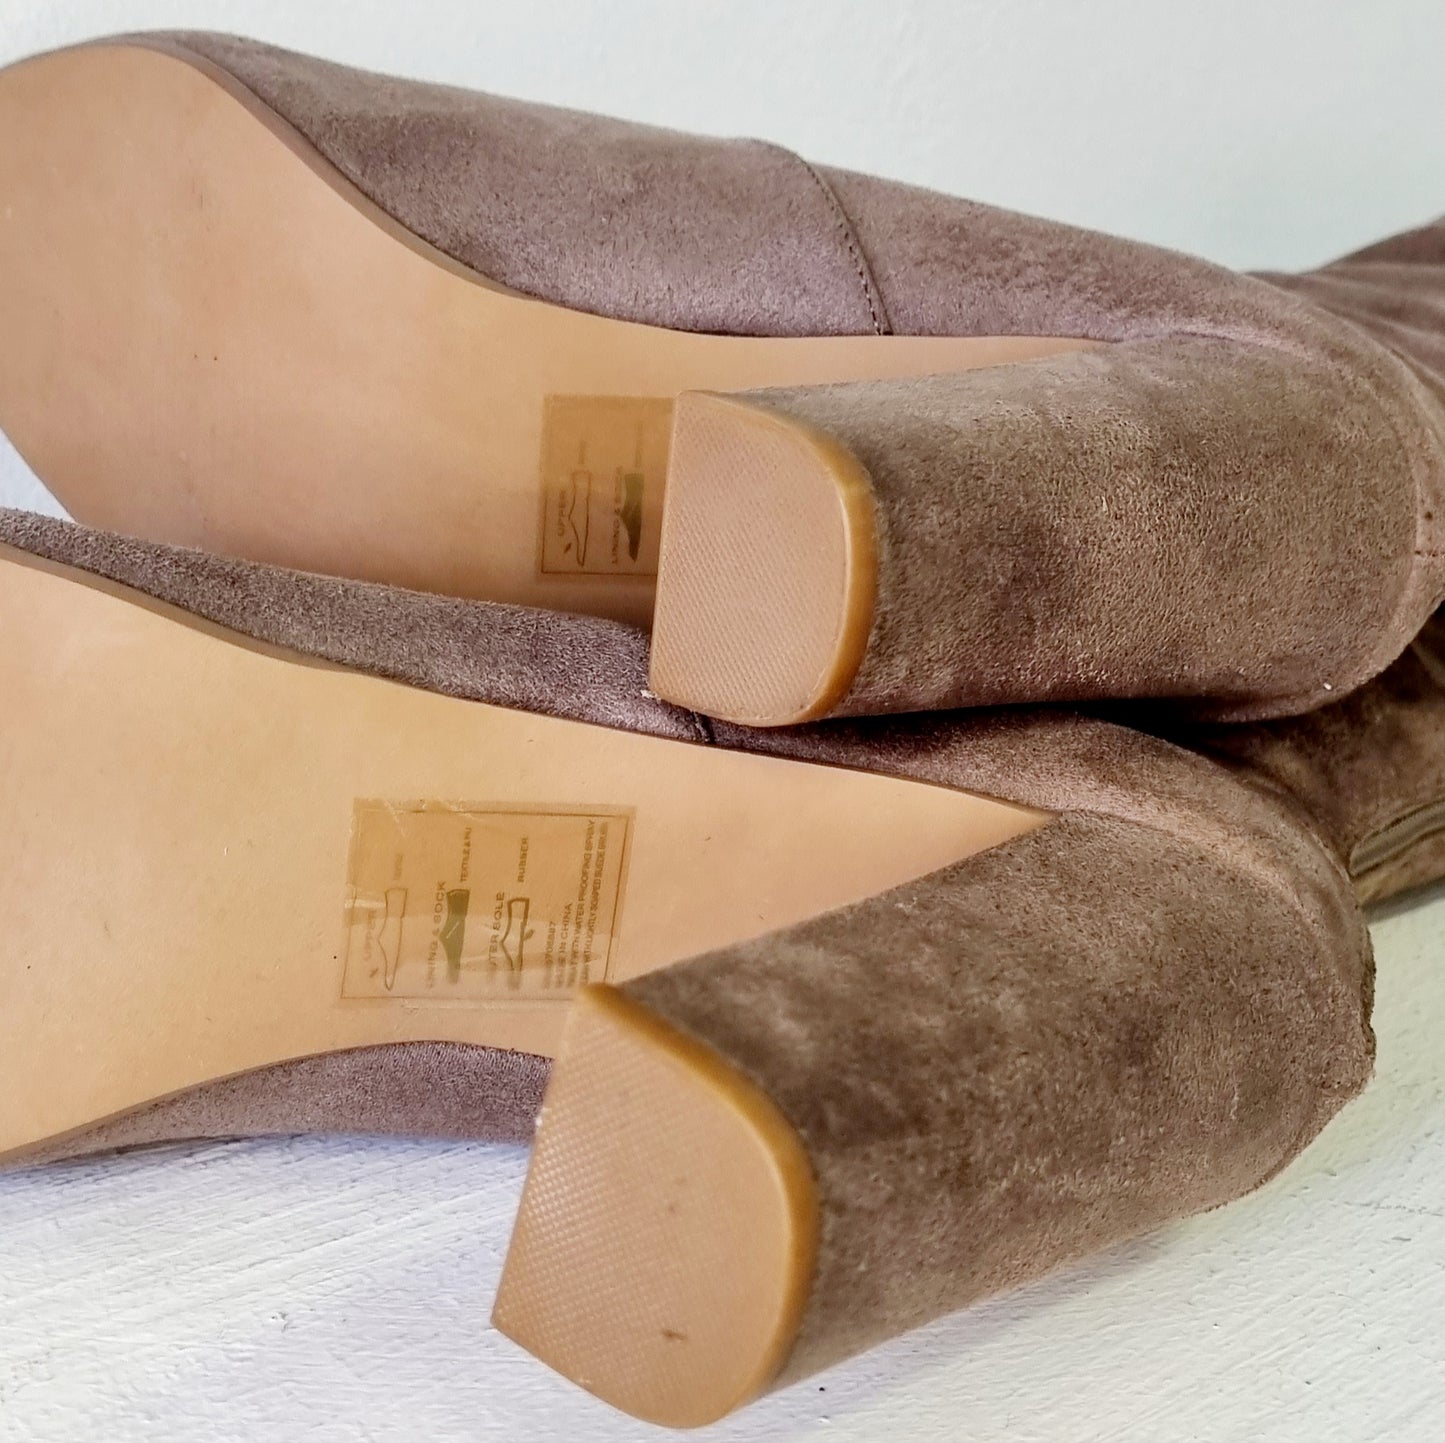 Emotions - Light Brown Thigh Hi Square Heeled Boots